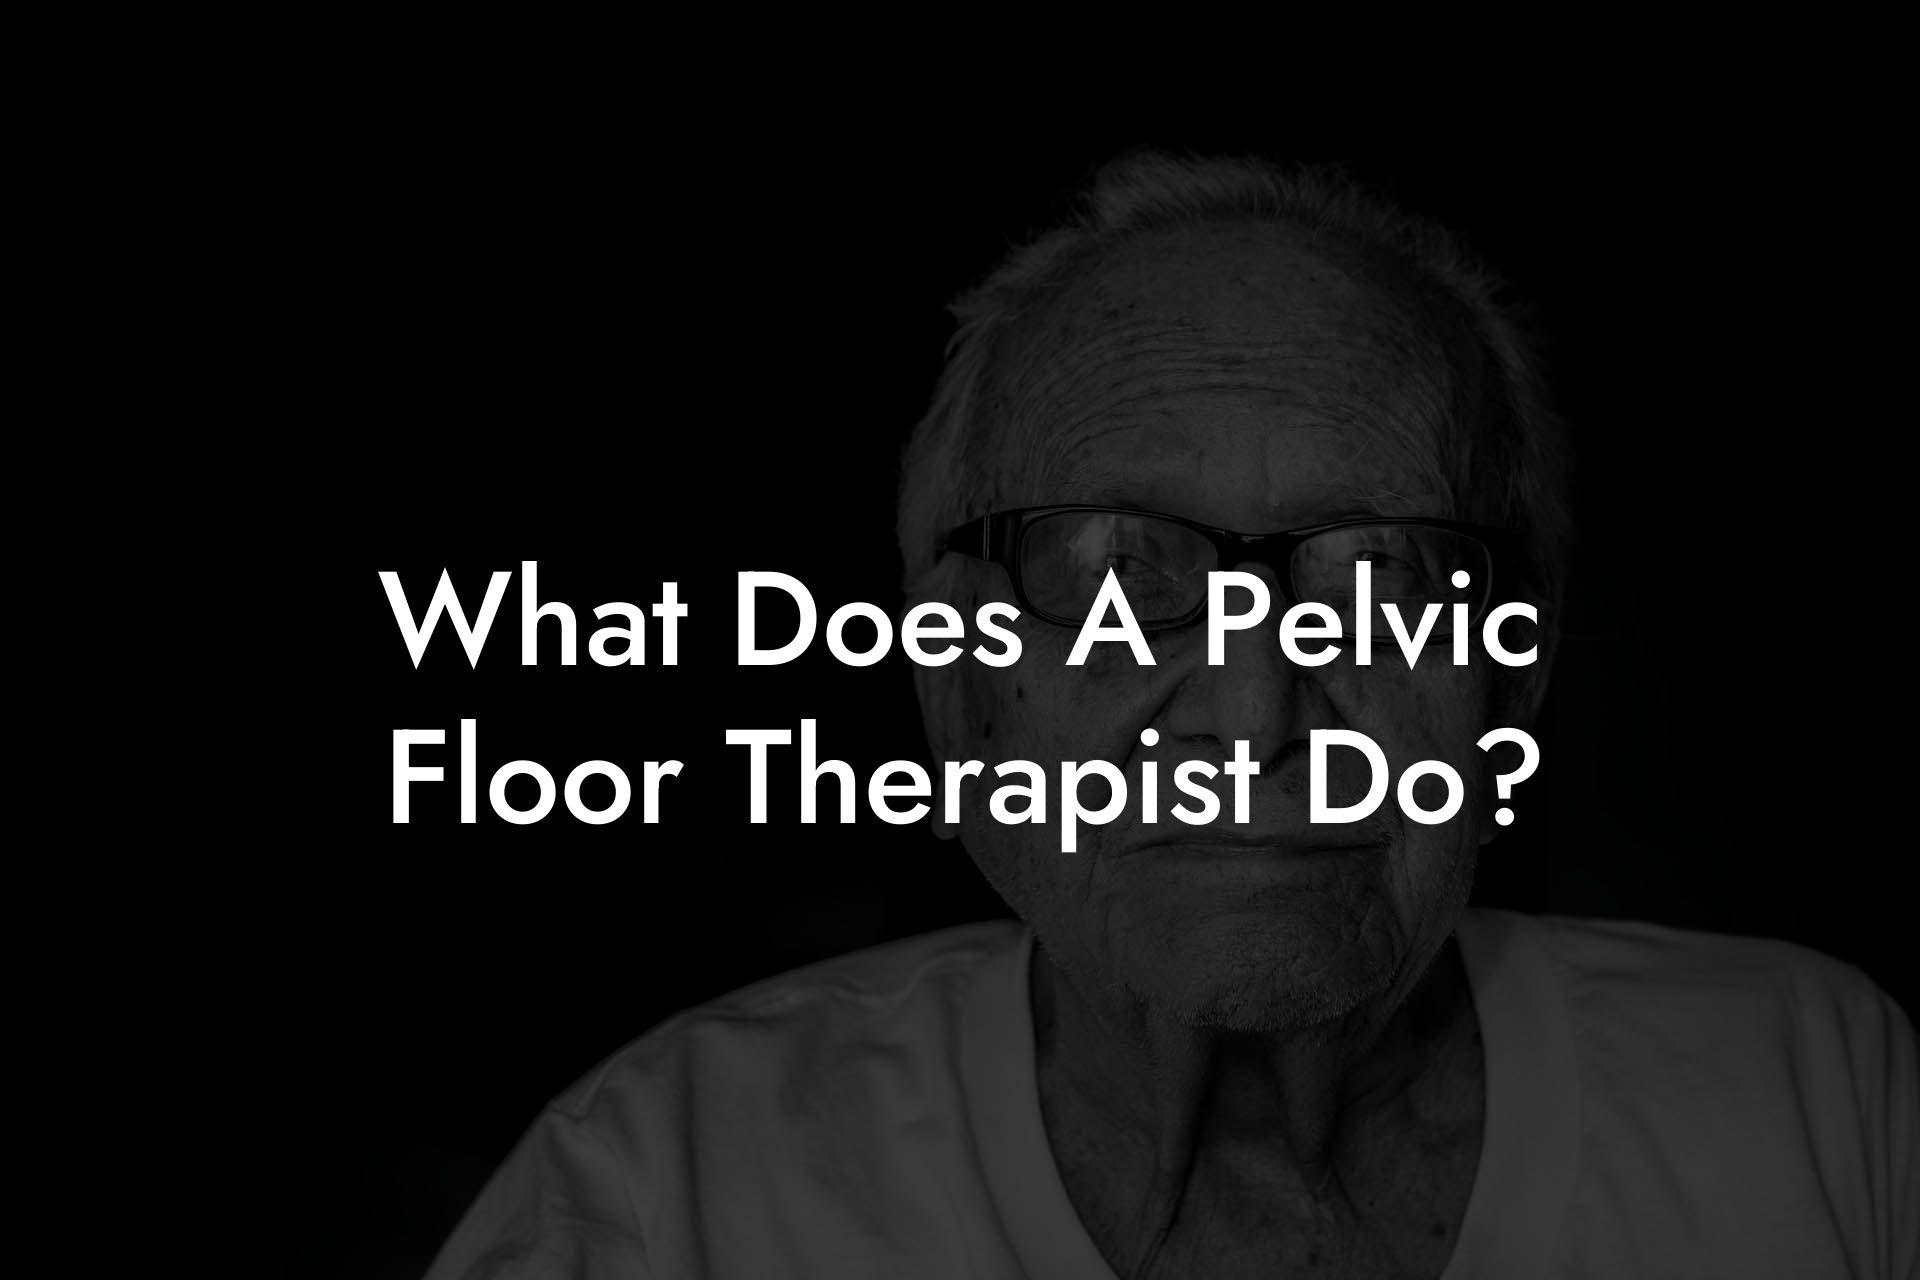 What Does A Pelvic Floor Therapist Do?